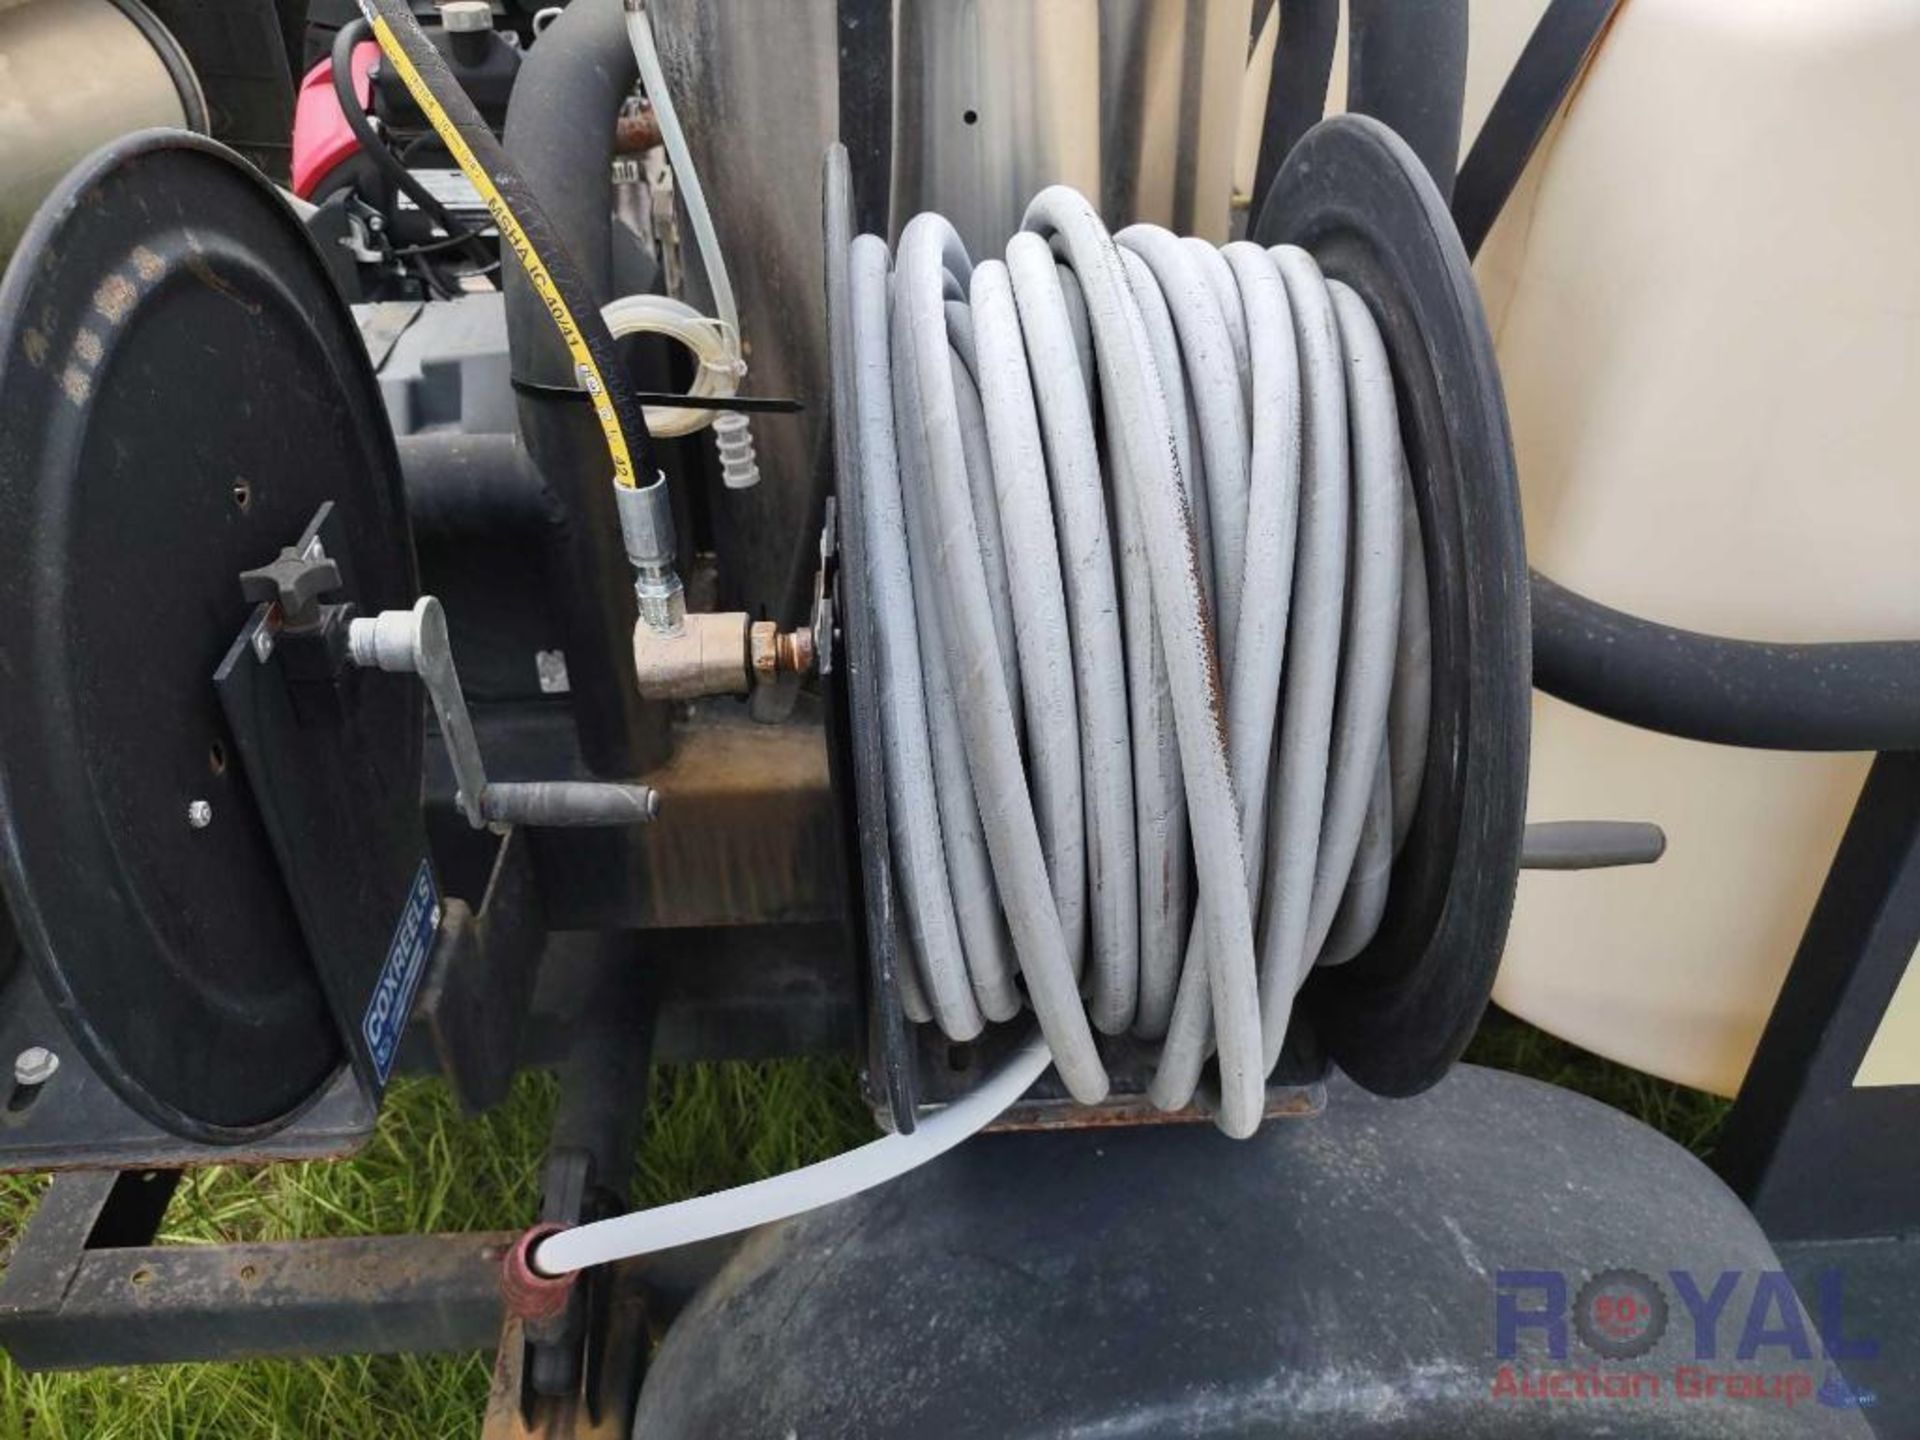 2016 Northstar Towable Hot Water Pressure Washer - Image 15 of 18